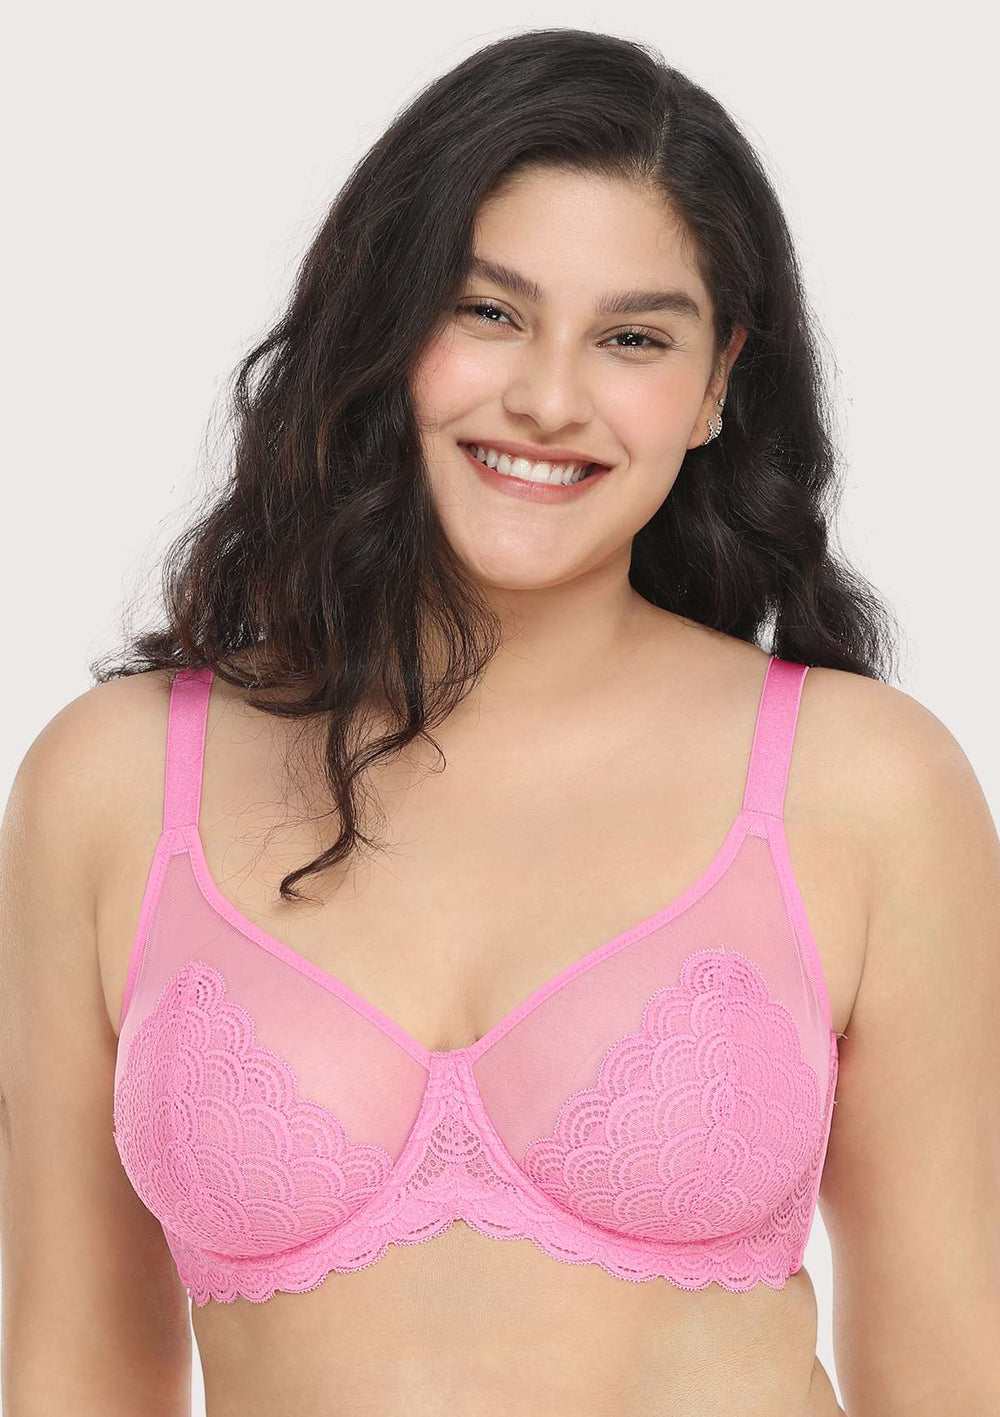 hsialife.official on Instagram: 👙🤩Our Anemone Unlined Lace Bra